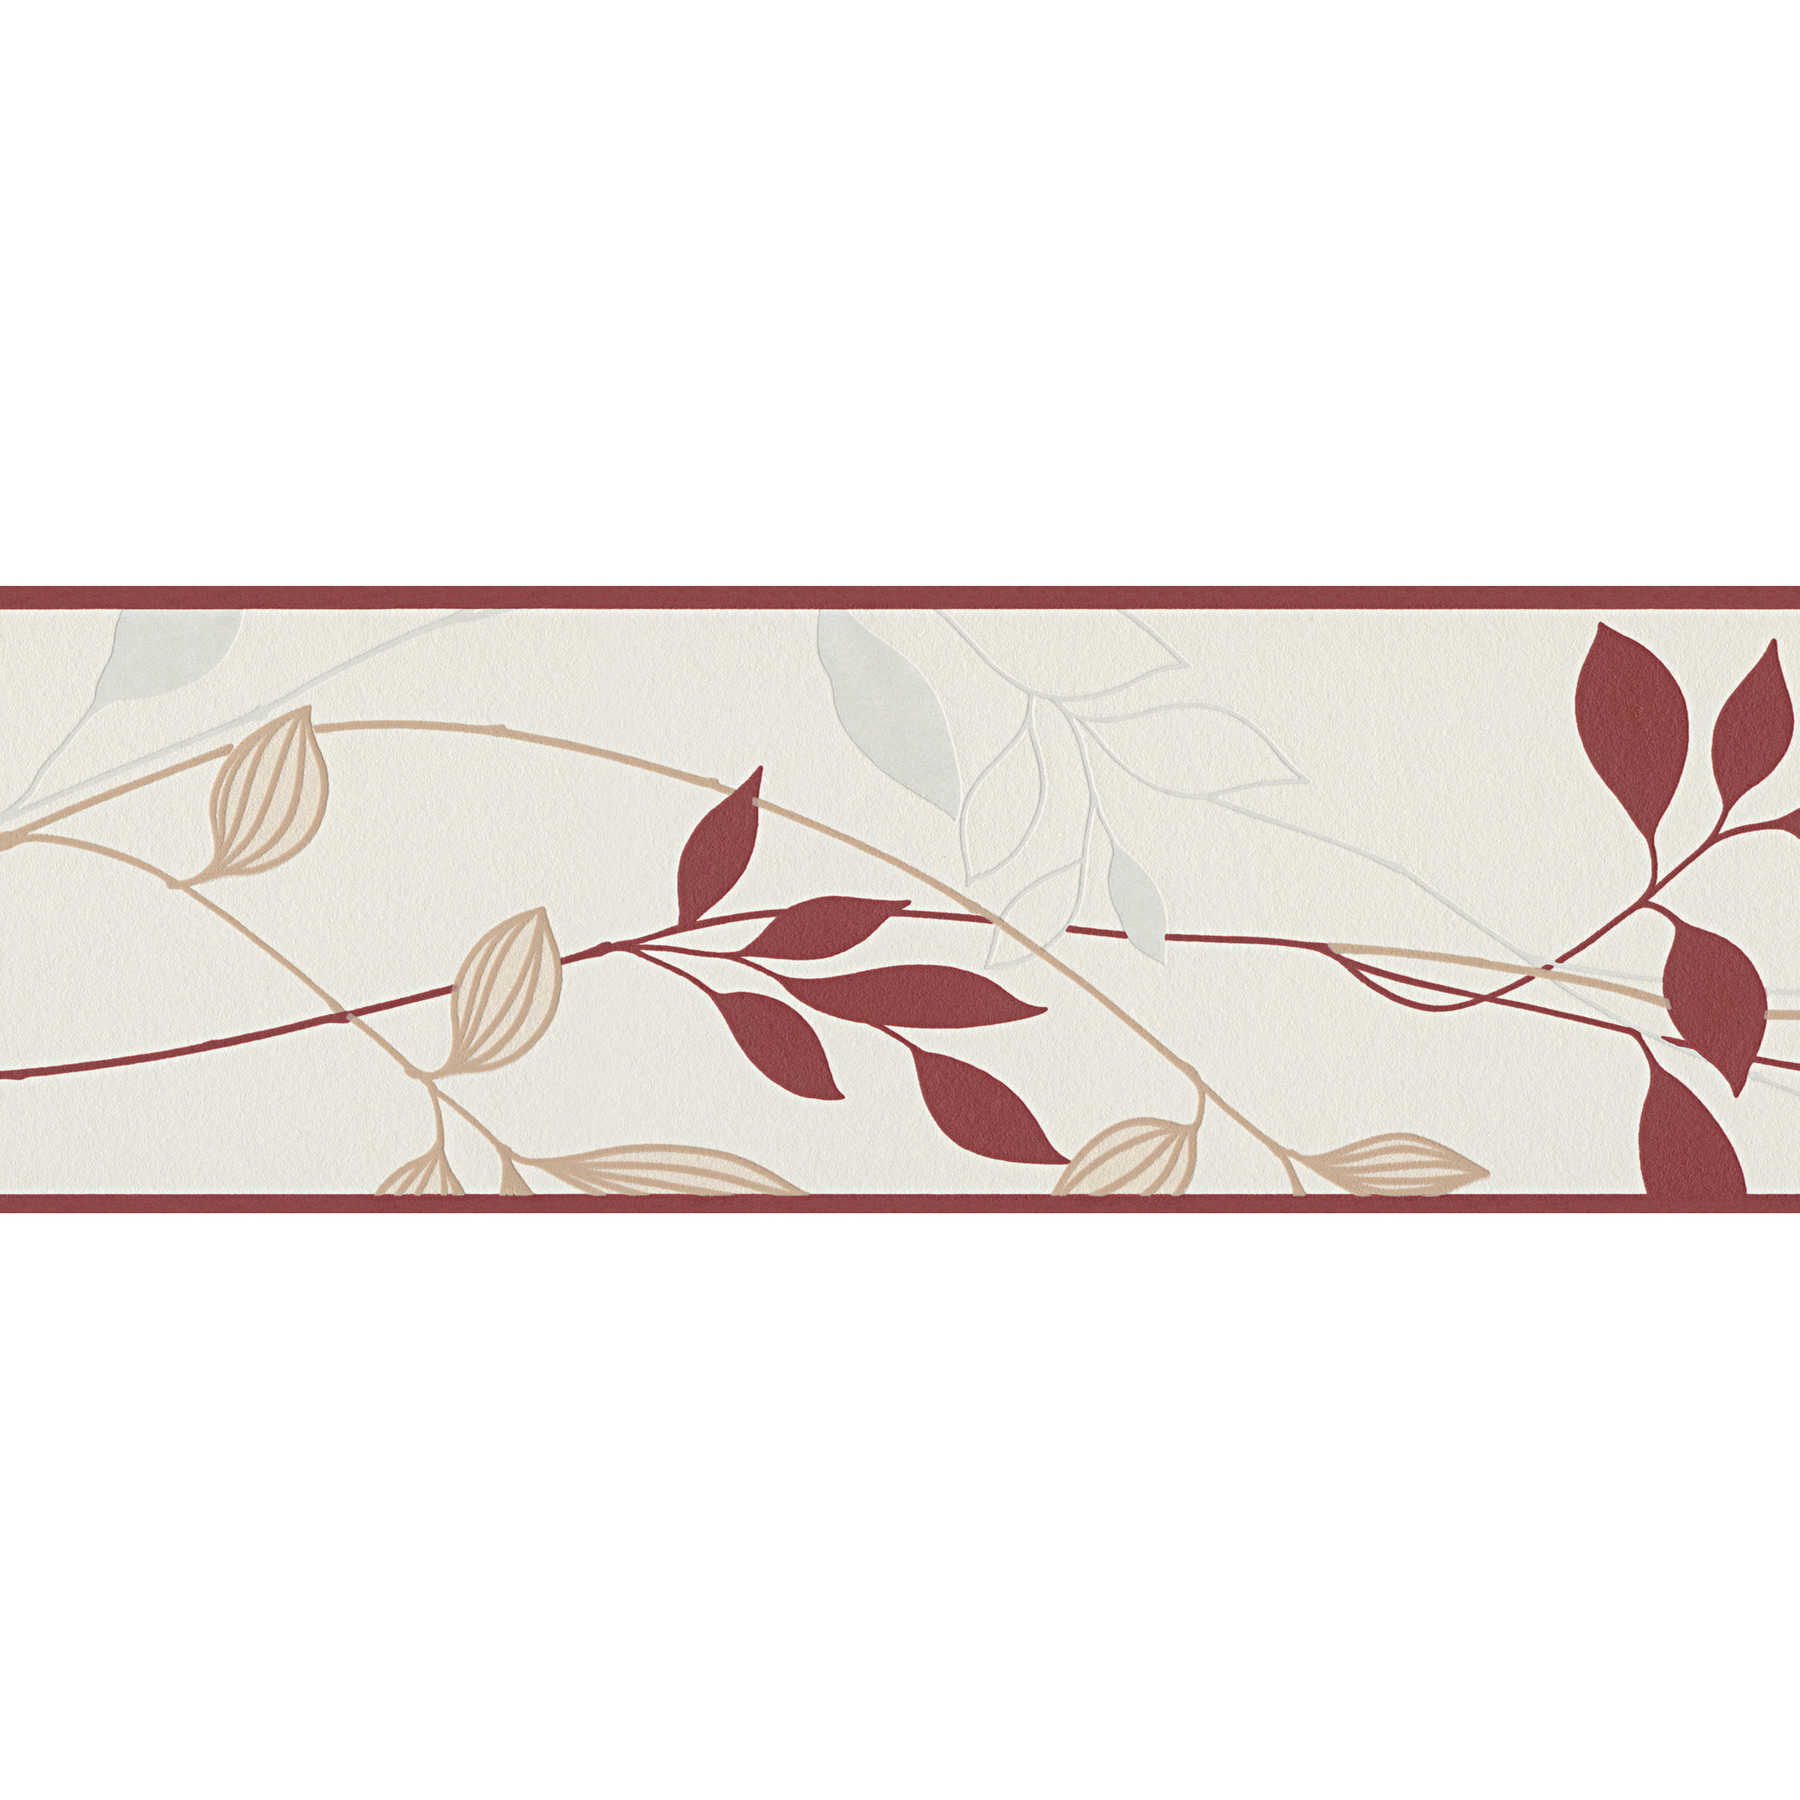         Leaves tendrils border with natural plant motif - Red, Cream
    